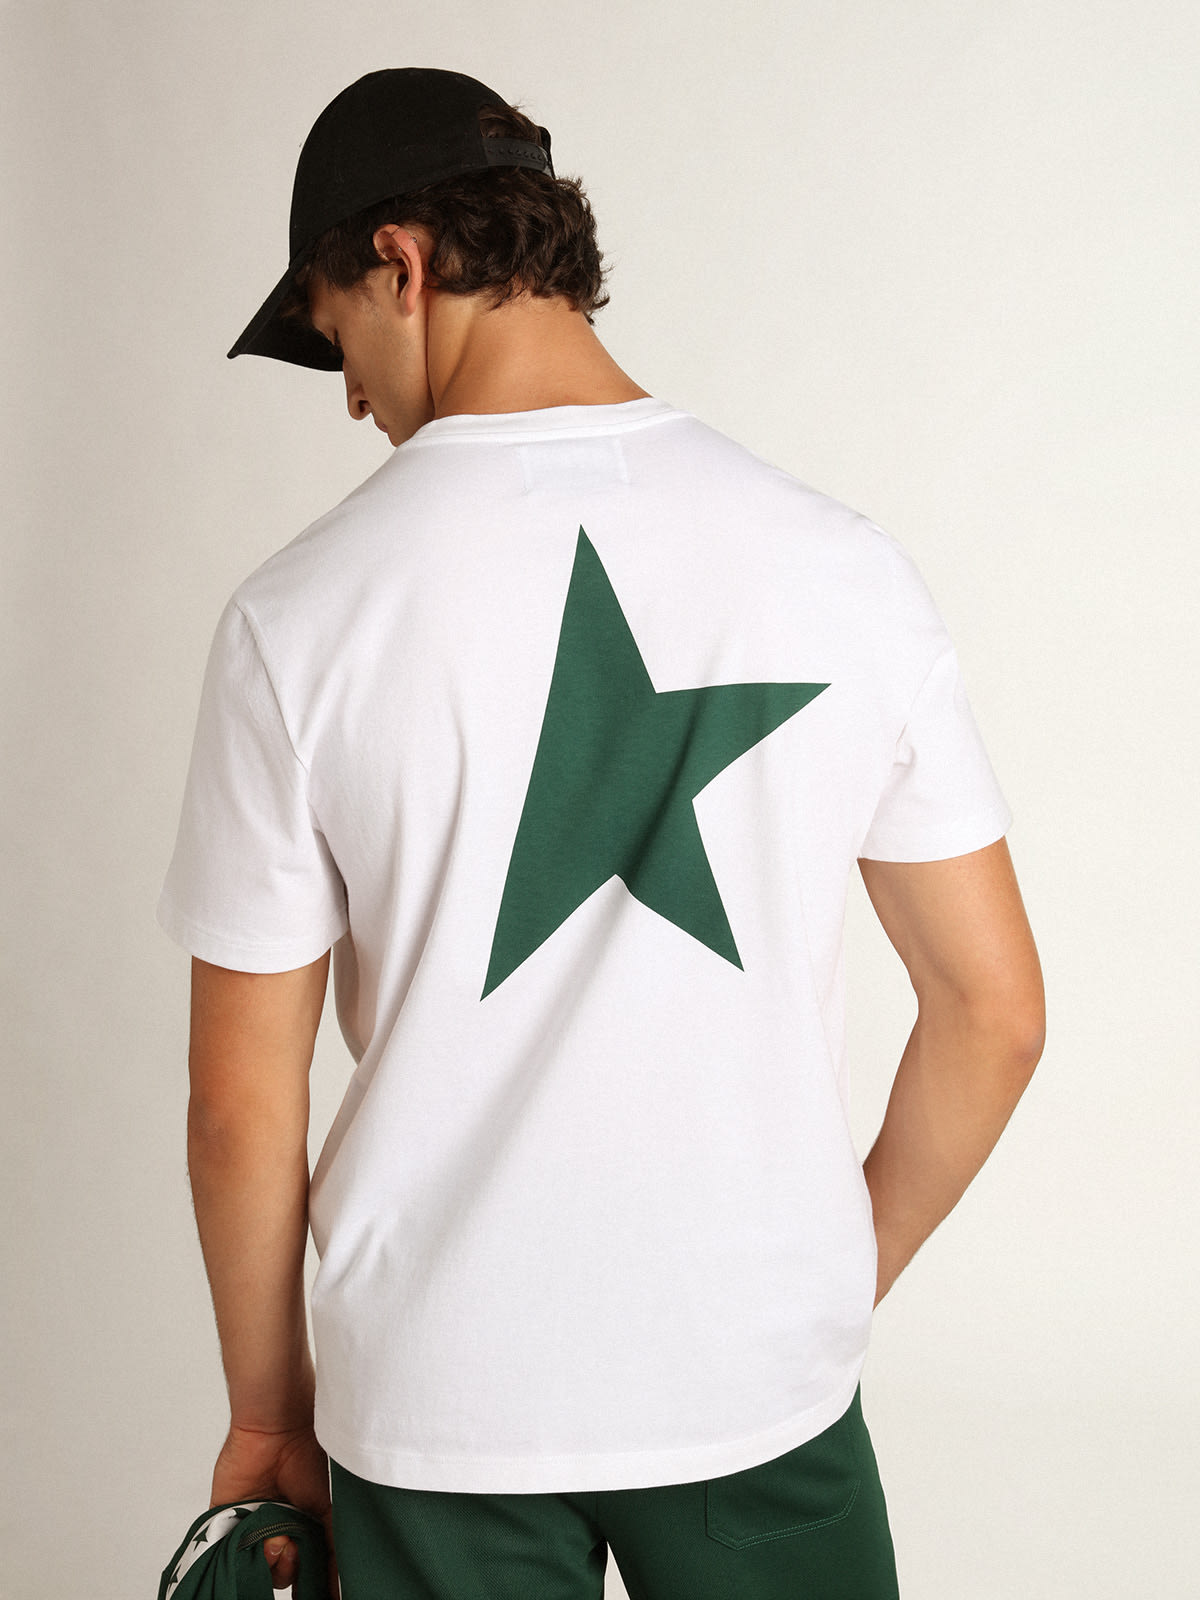 Golden Goose - Men's white T-shirt with contrasting green logo and star in 